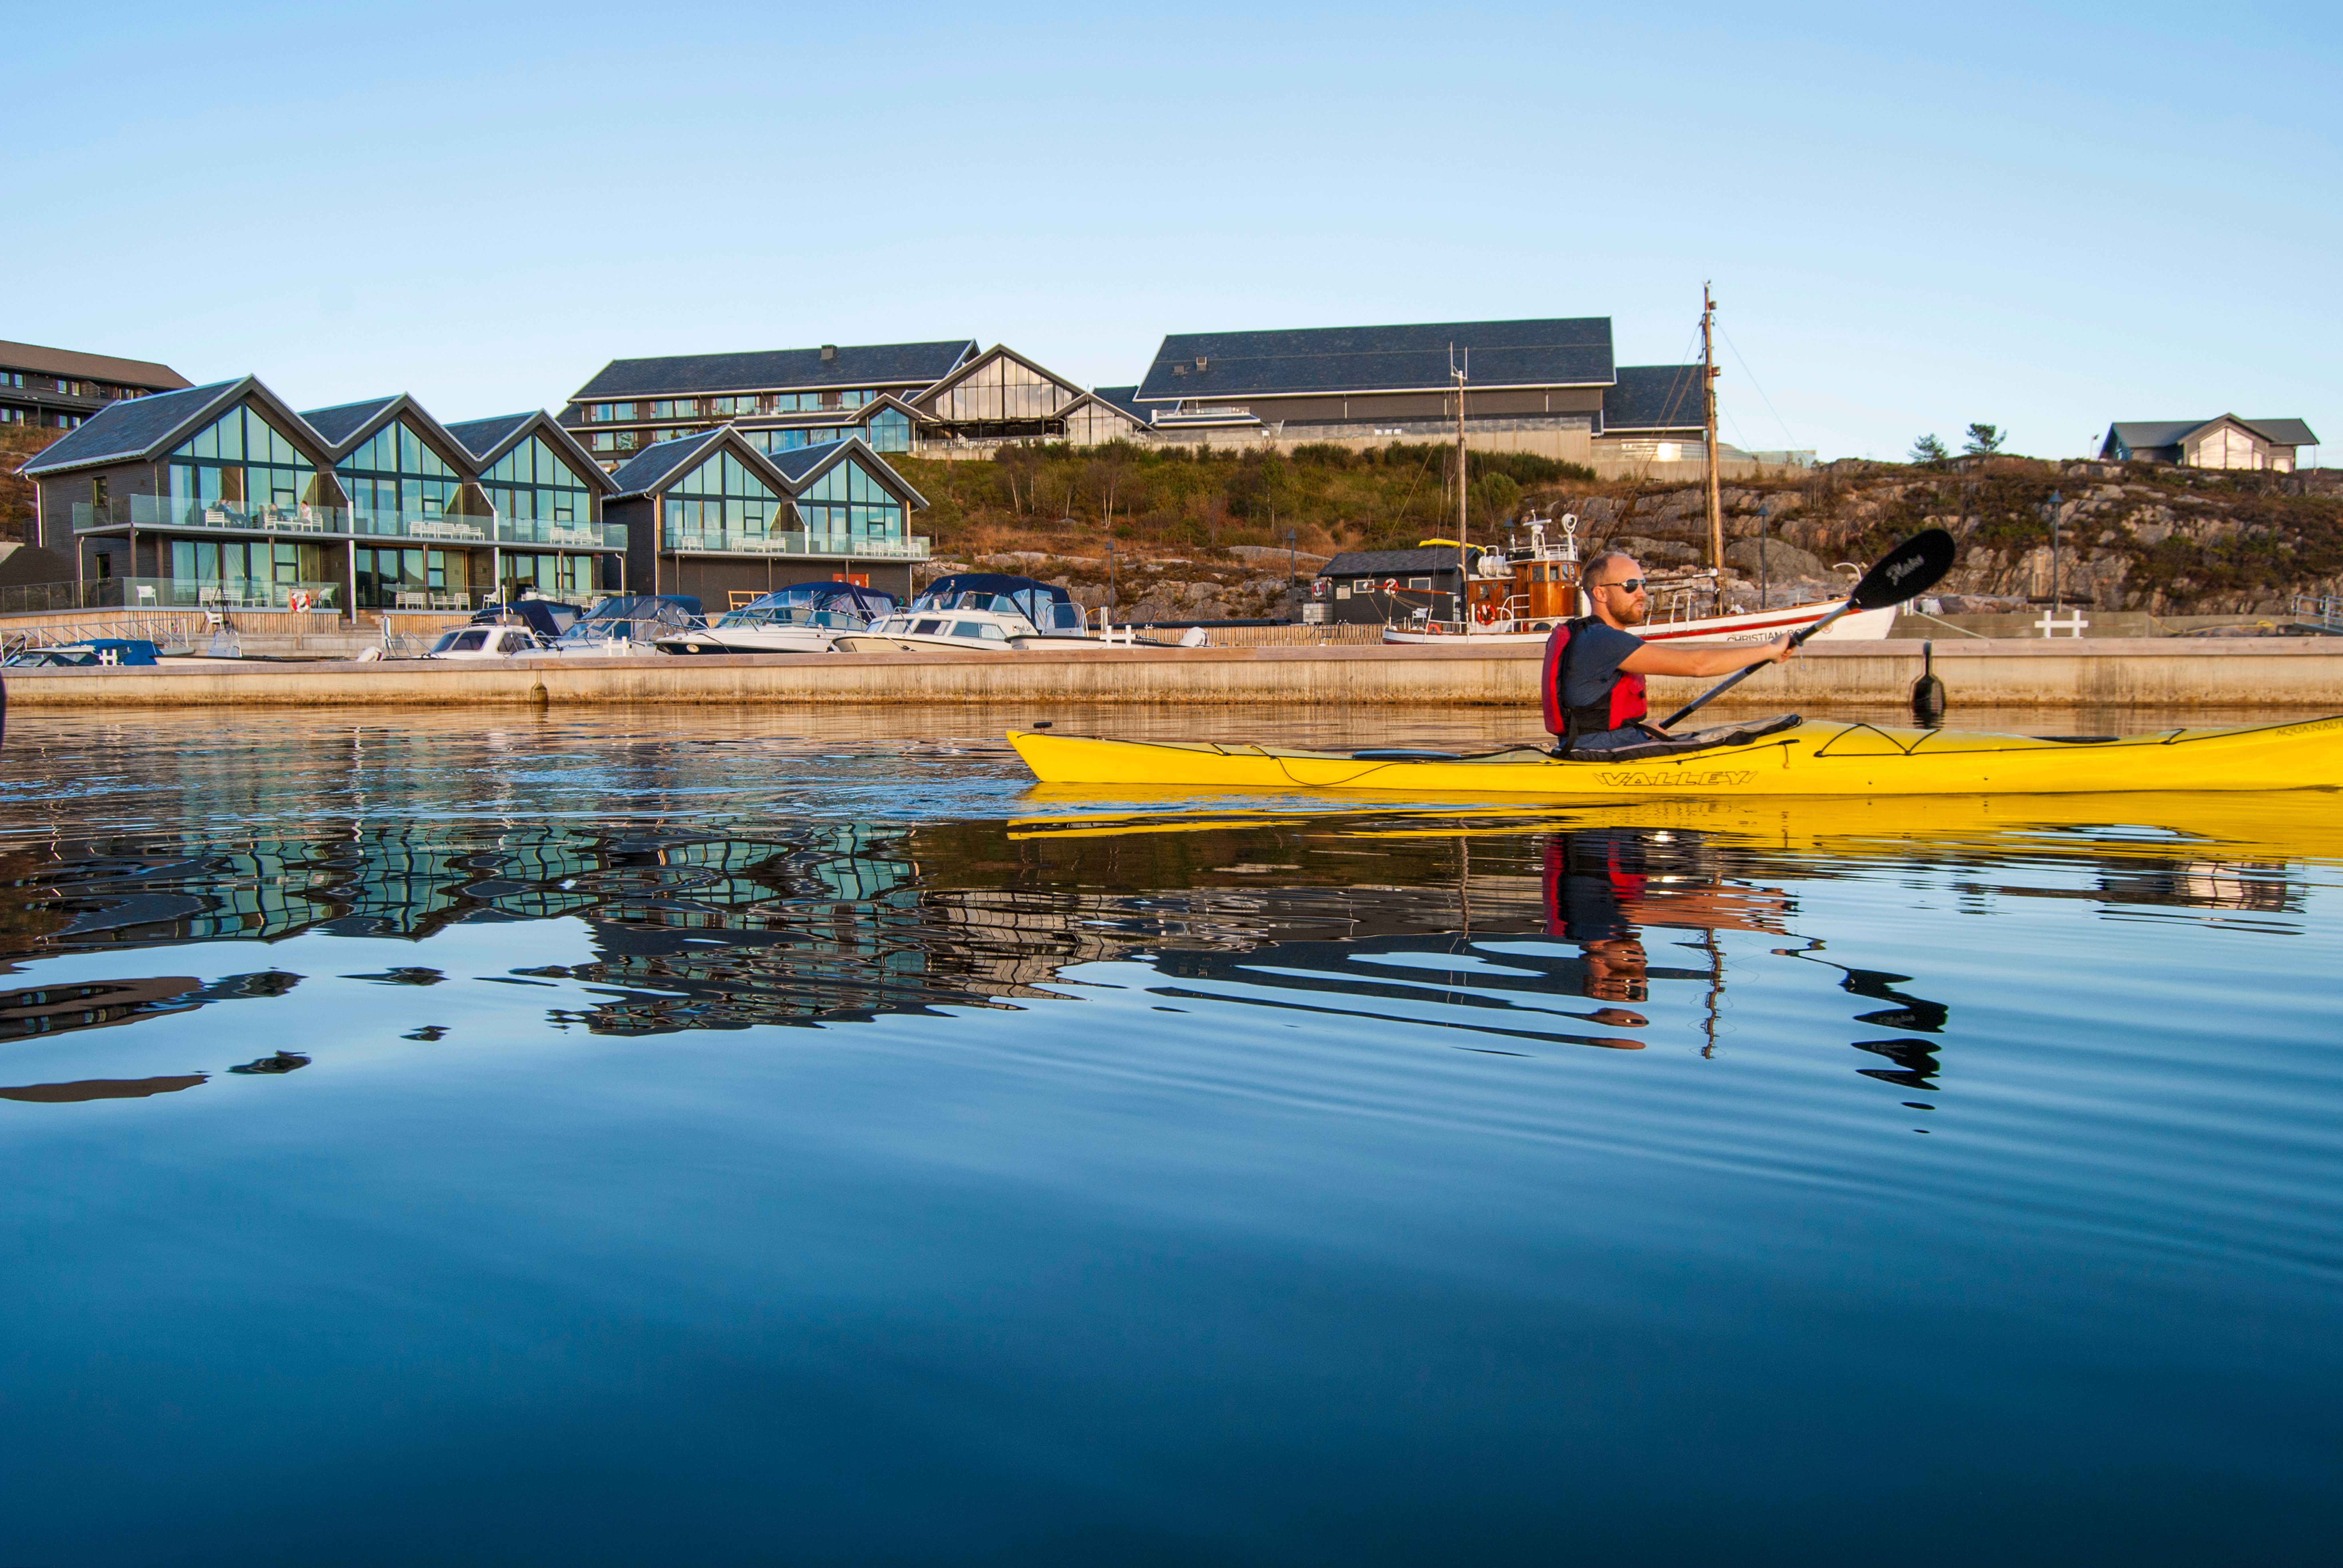 A guy kayaking on a perfectly calm sea, with Panorama hotel and marina in the background